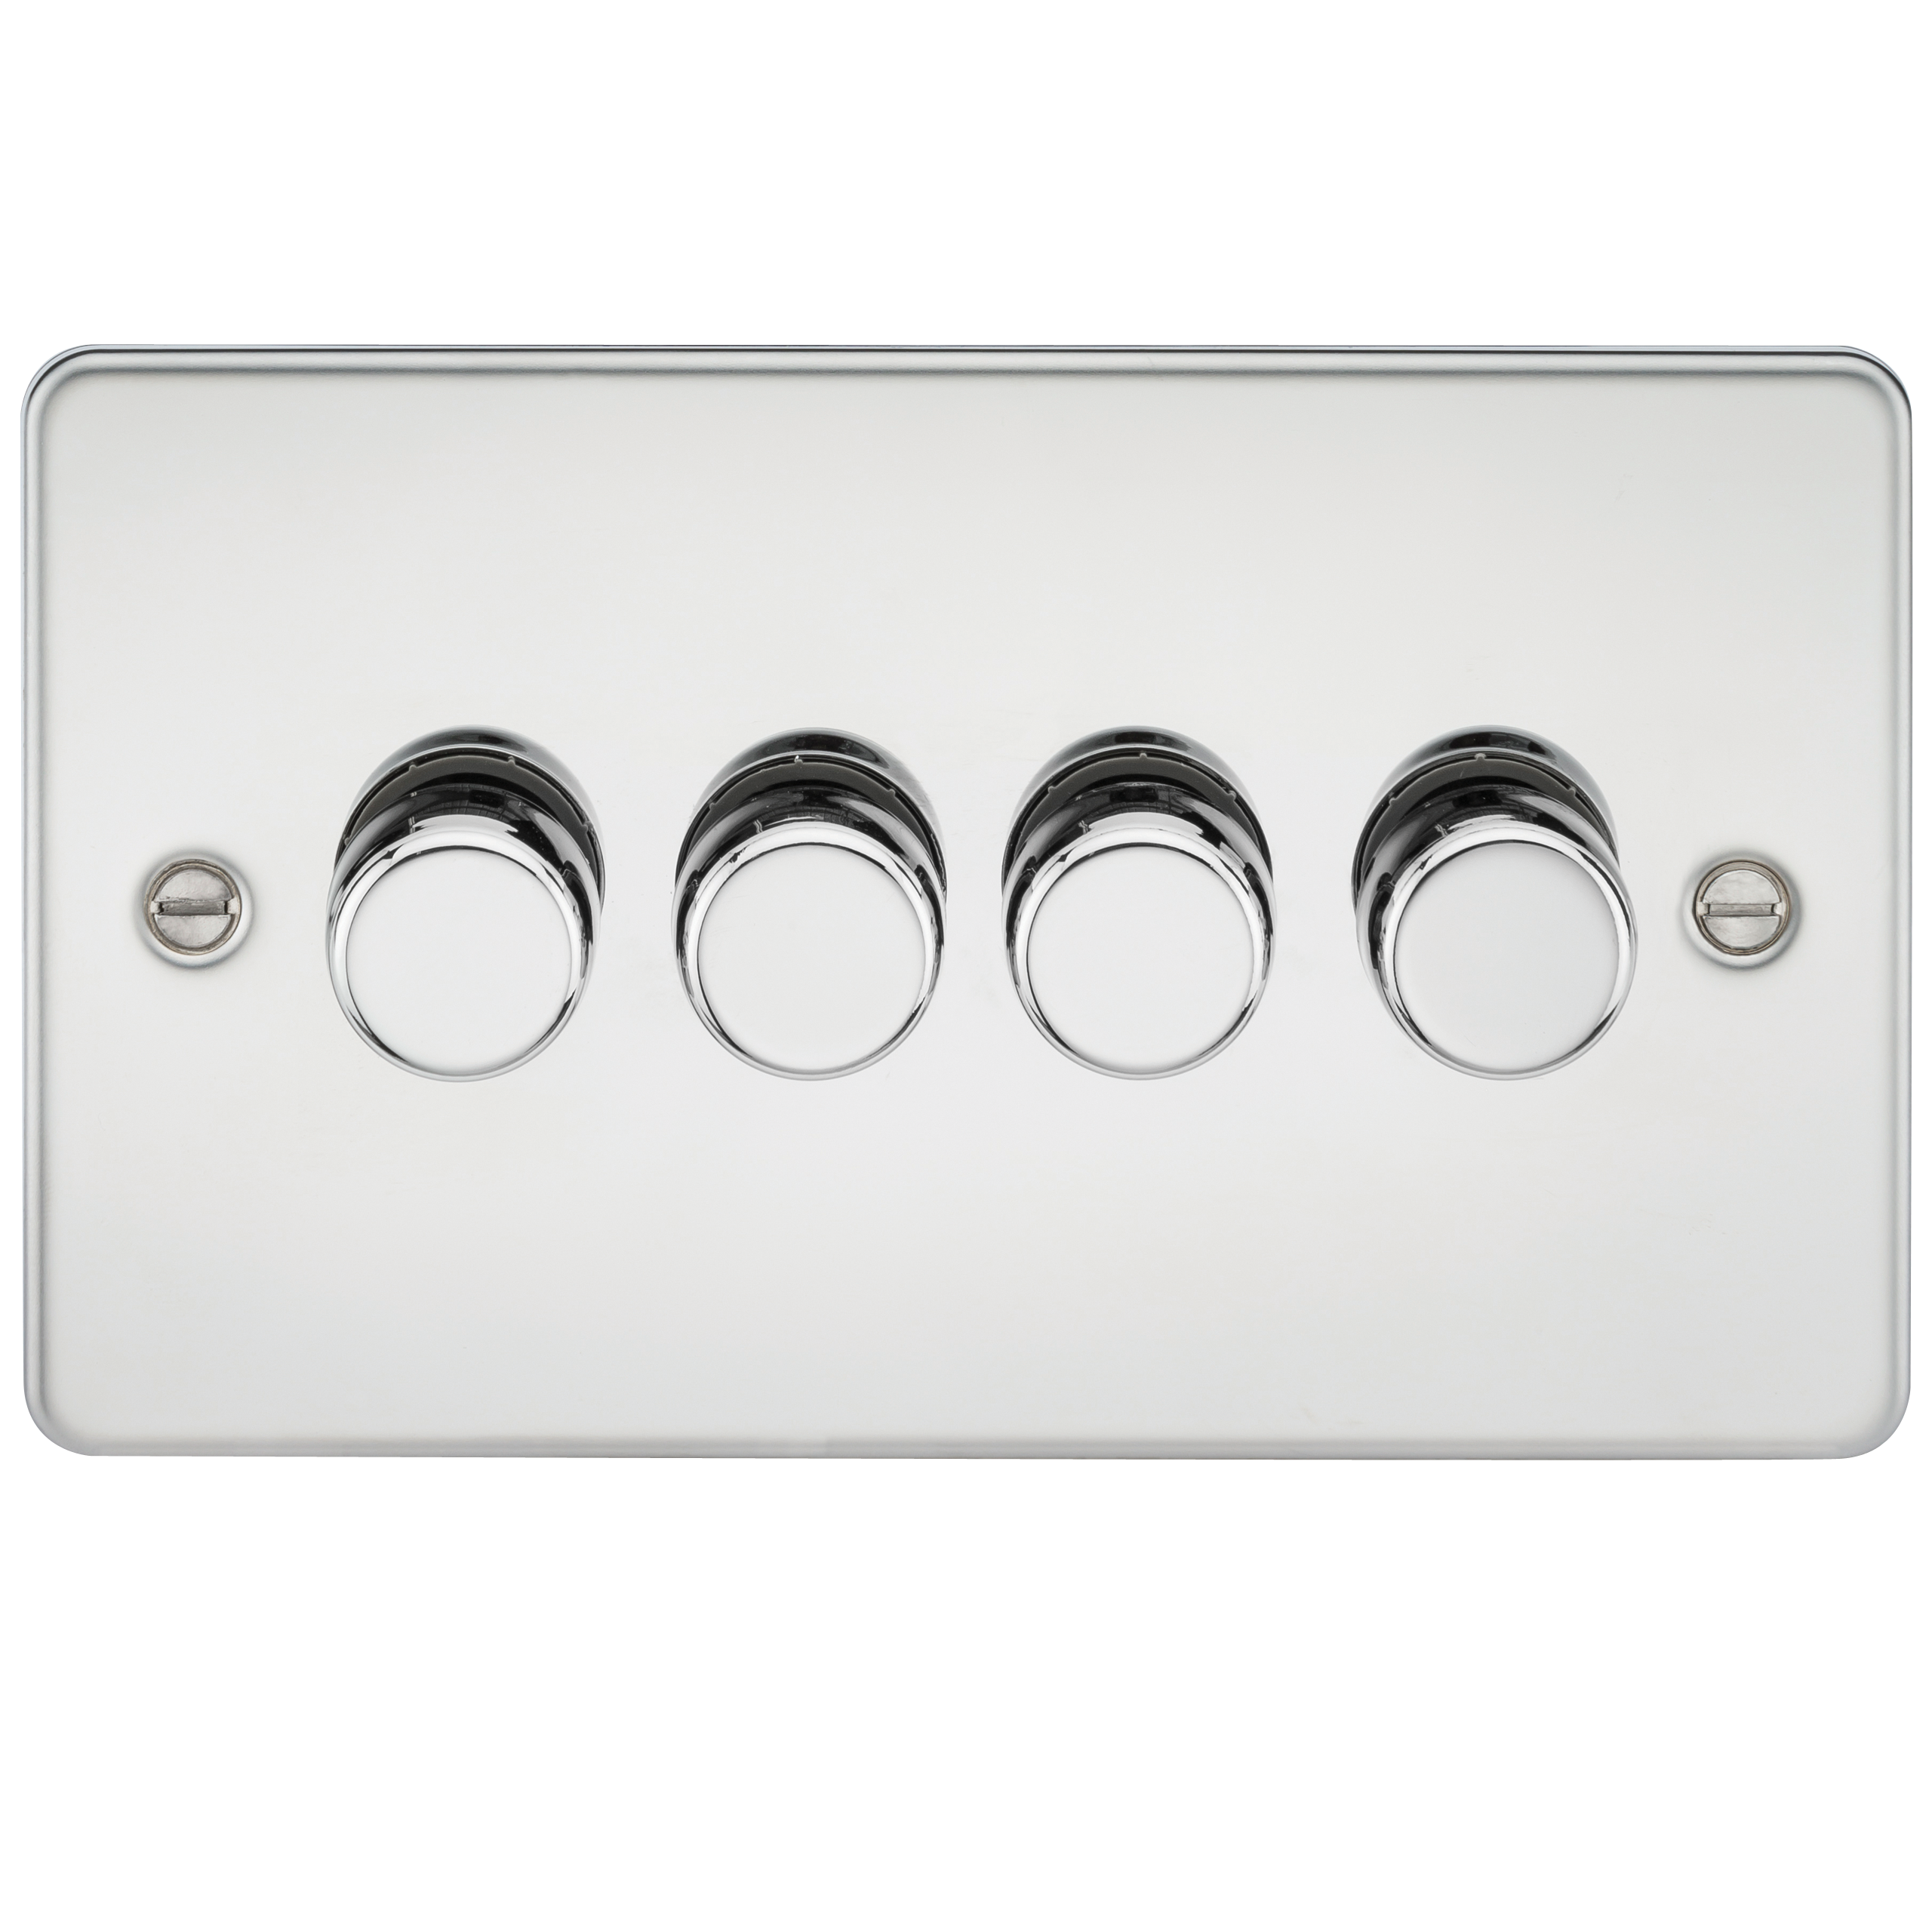 FLAT PLATE 4G 2 WAY 40-400W DIMMER - POLISHED CHROME - FP2174PC 